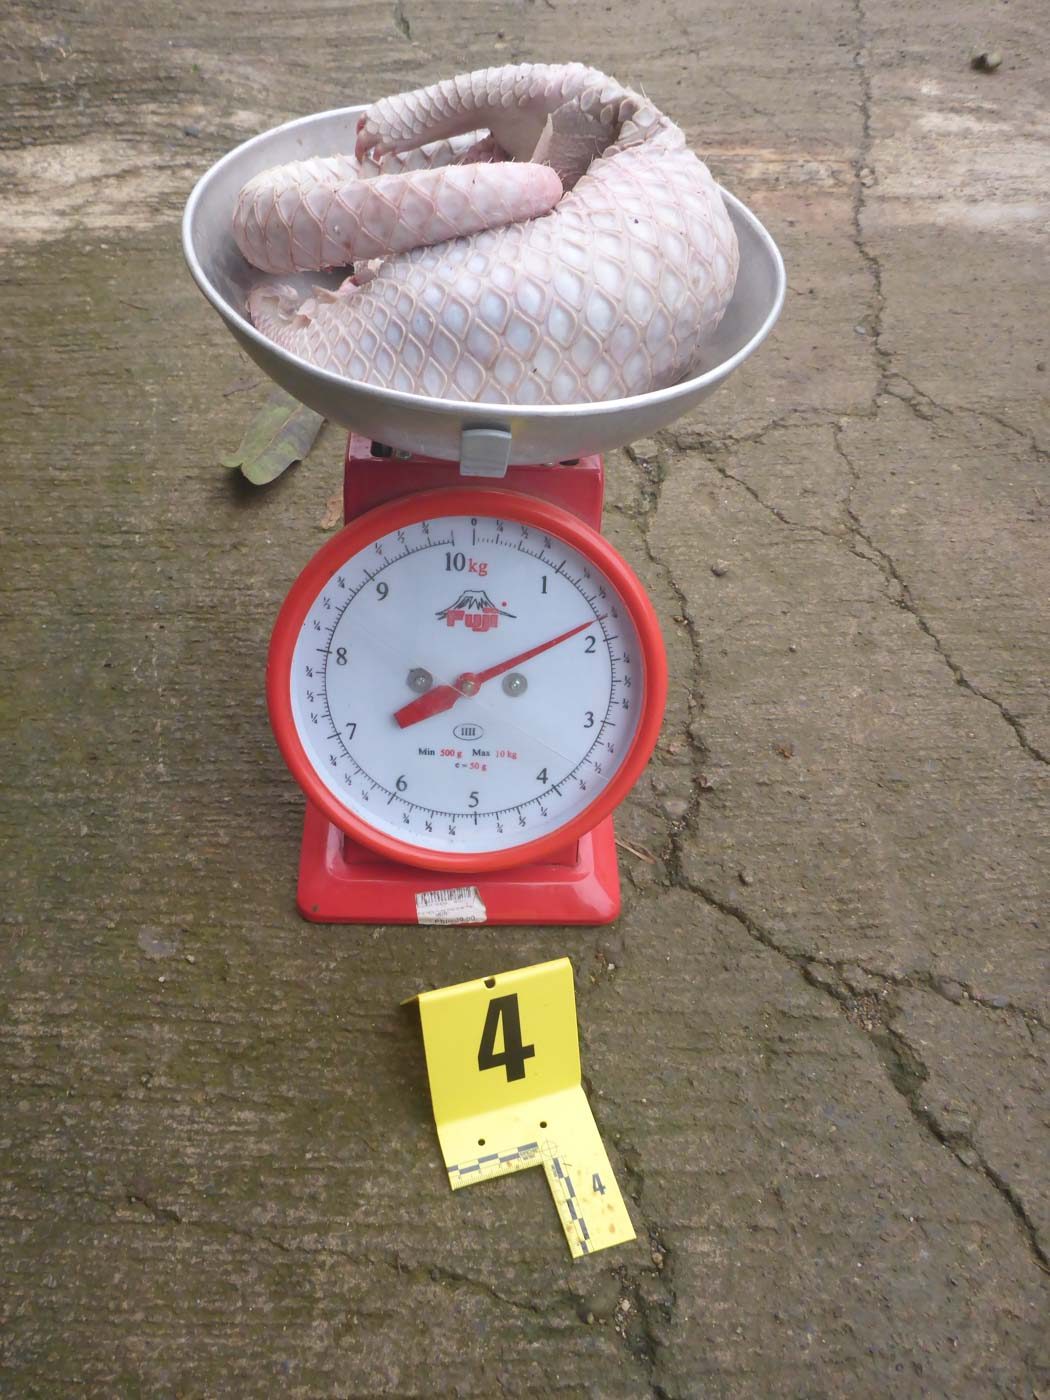 CONFISCATED. Wildlife forensics specialists identify the species of confiscated pangolin meat, and also record its weight and length for documentation purposes. This was just one of the 21 dead pangolin seized in an apprehension in Barangay Santa Lourdes, Puerto Princesa City on July 28, 2018. Photo by PCSD Staff 